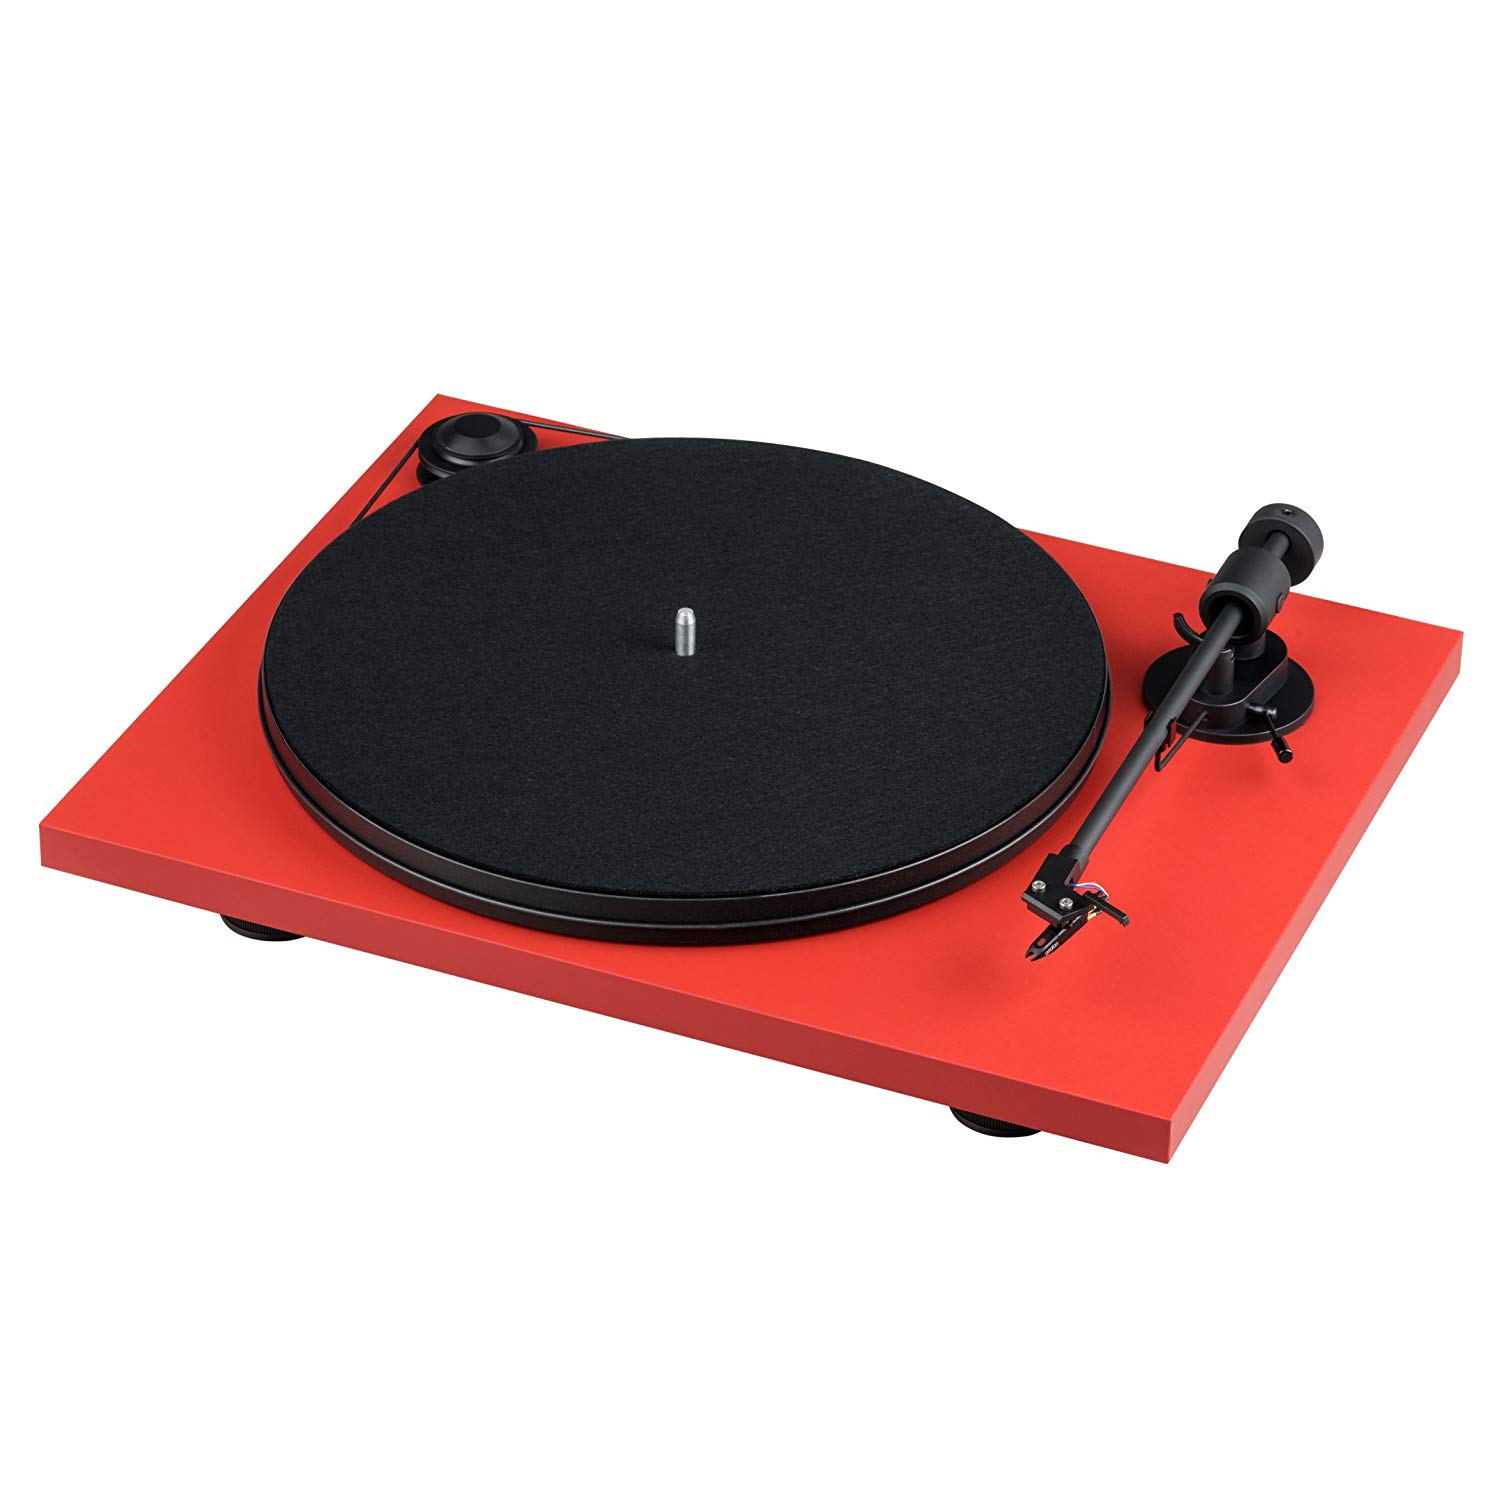 Проигрыватели винила Pro-Ject Primary E Phono (OM NN) red m m phono preamp with power switch ultra compact phono preamplifier turntable preamp with rca 1 4 inch trs interface